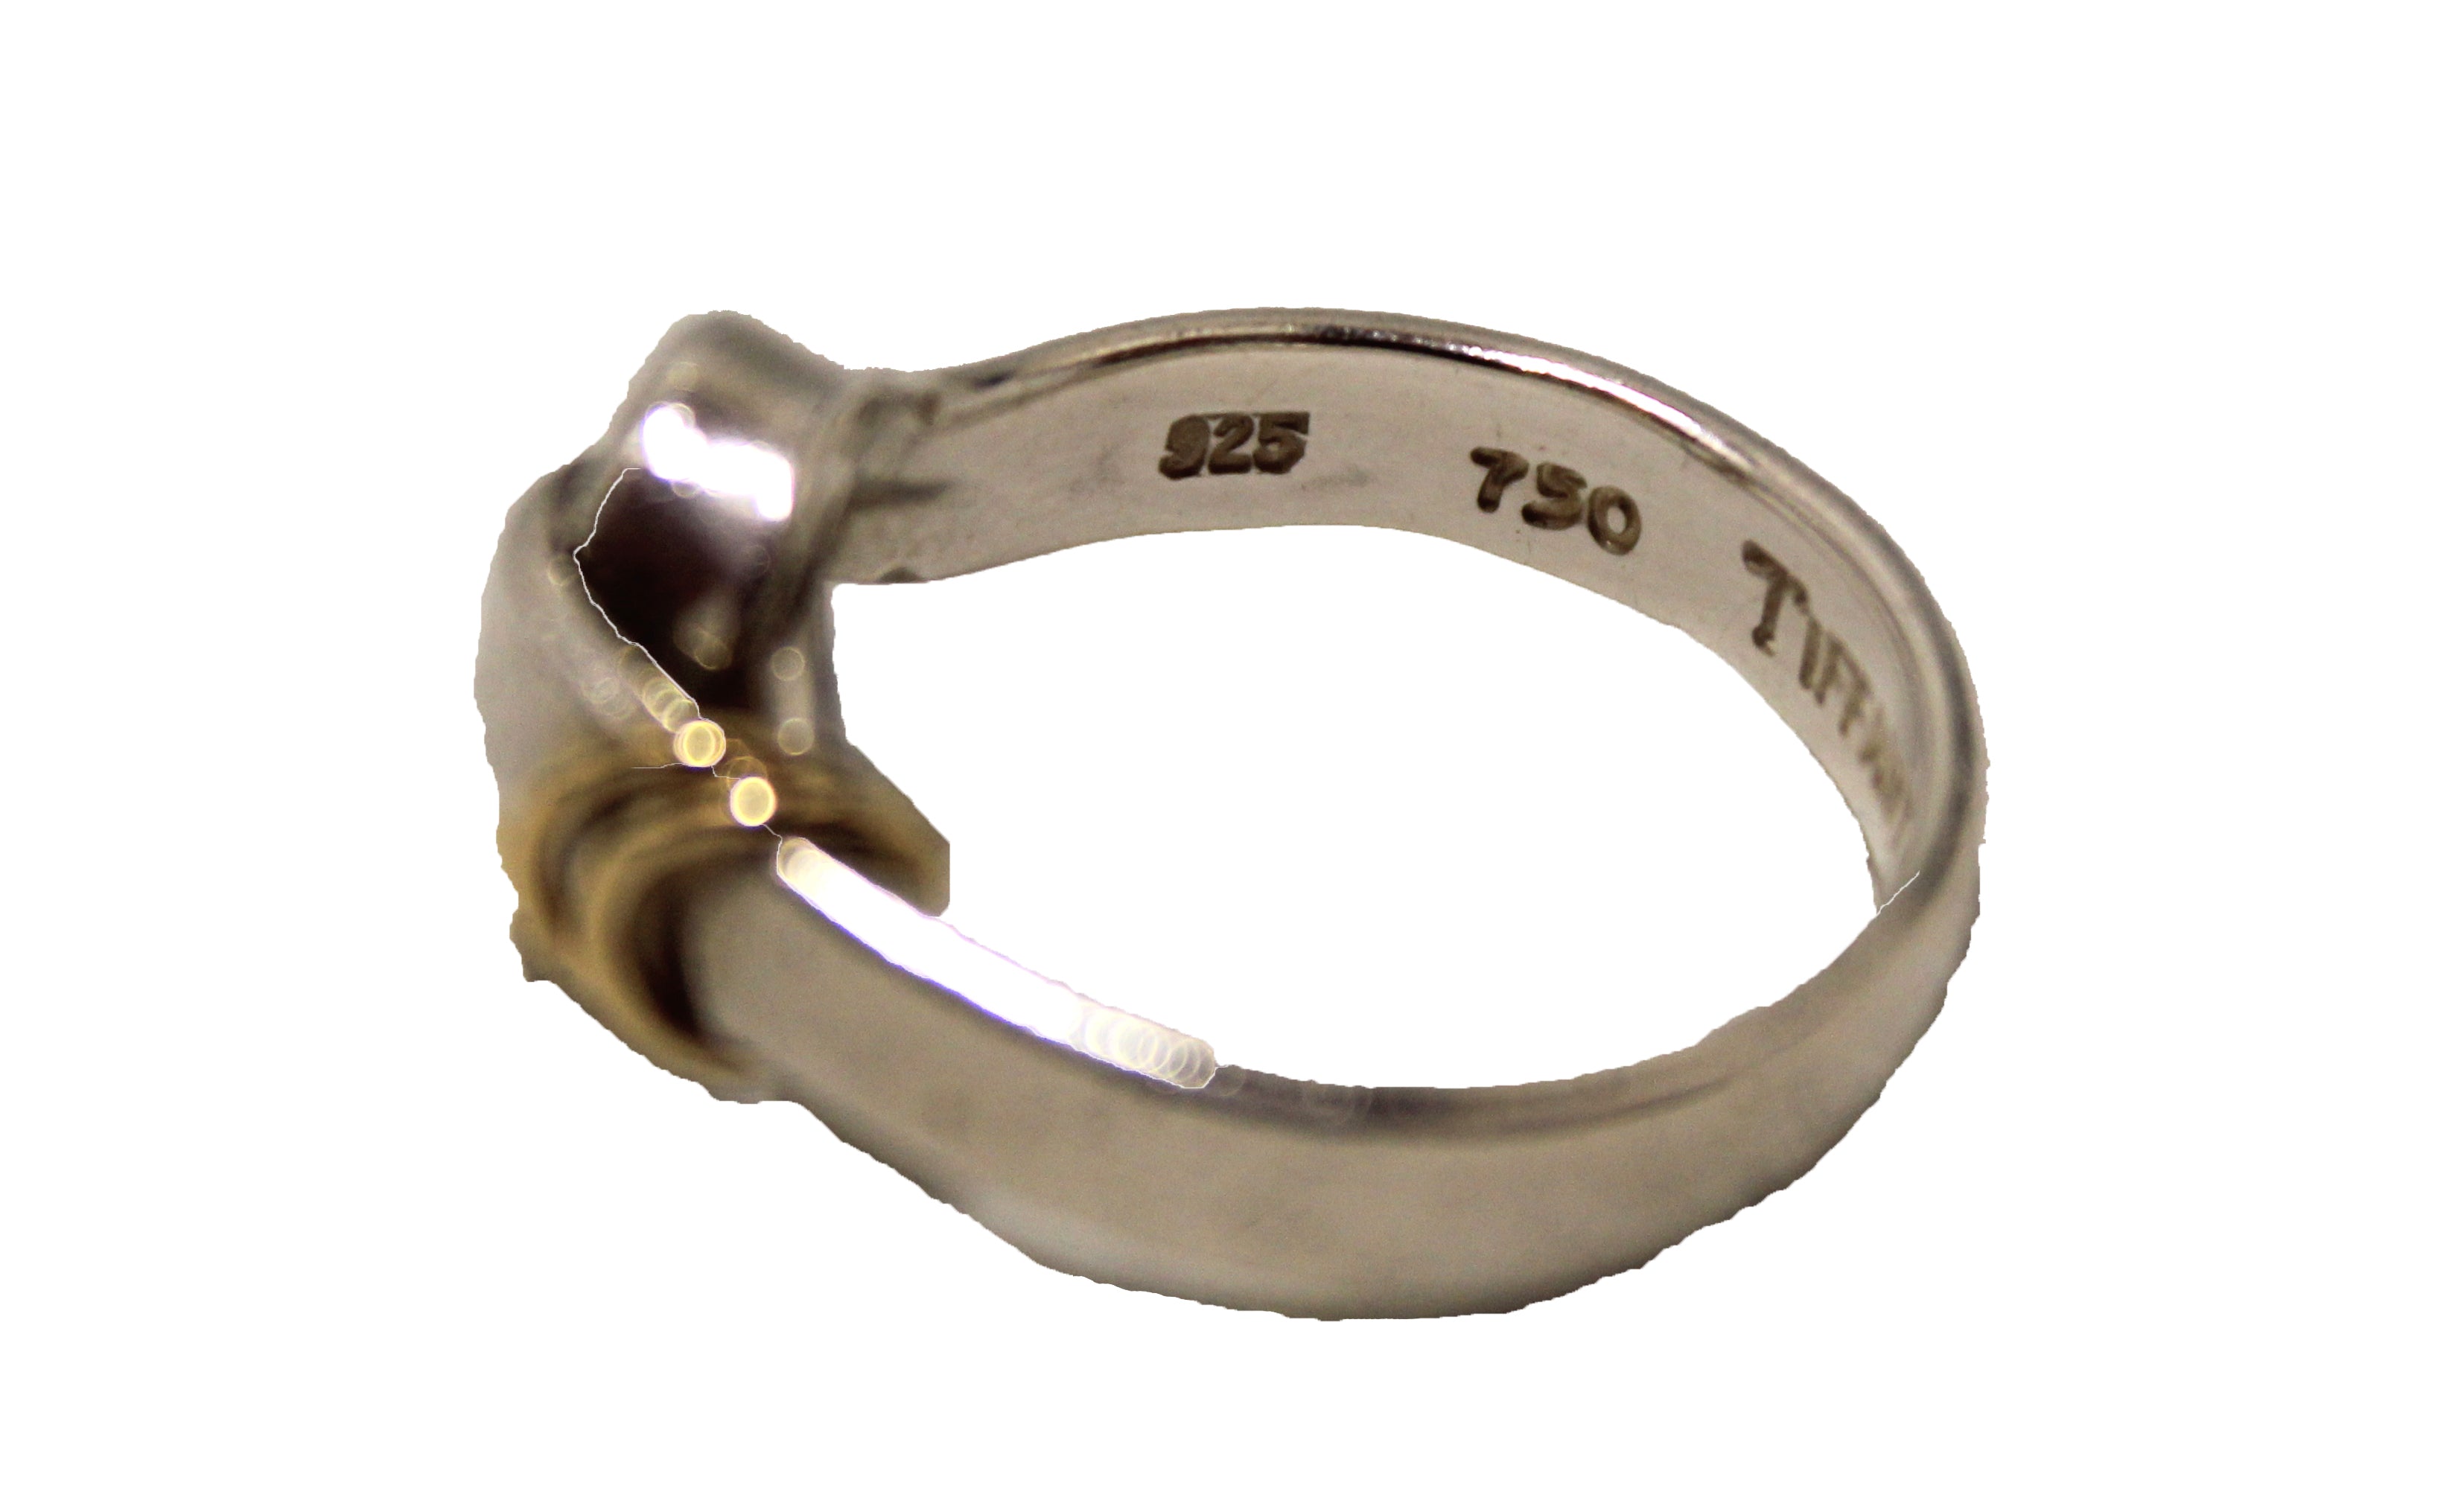 Authentic Tiffany & Co. 18K Gold & Sterling Silver 925 Hook and Eye Love Knot Ring Size 5.5